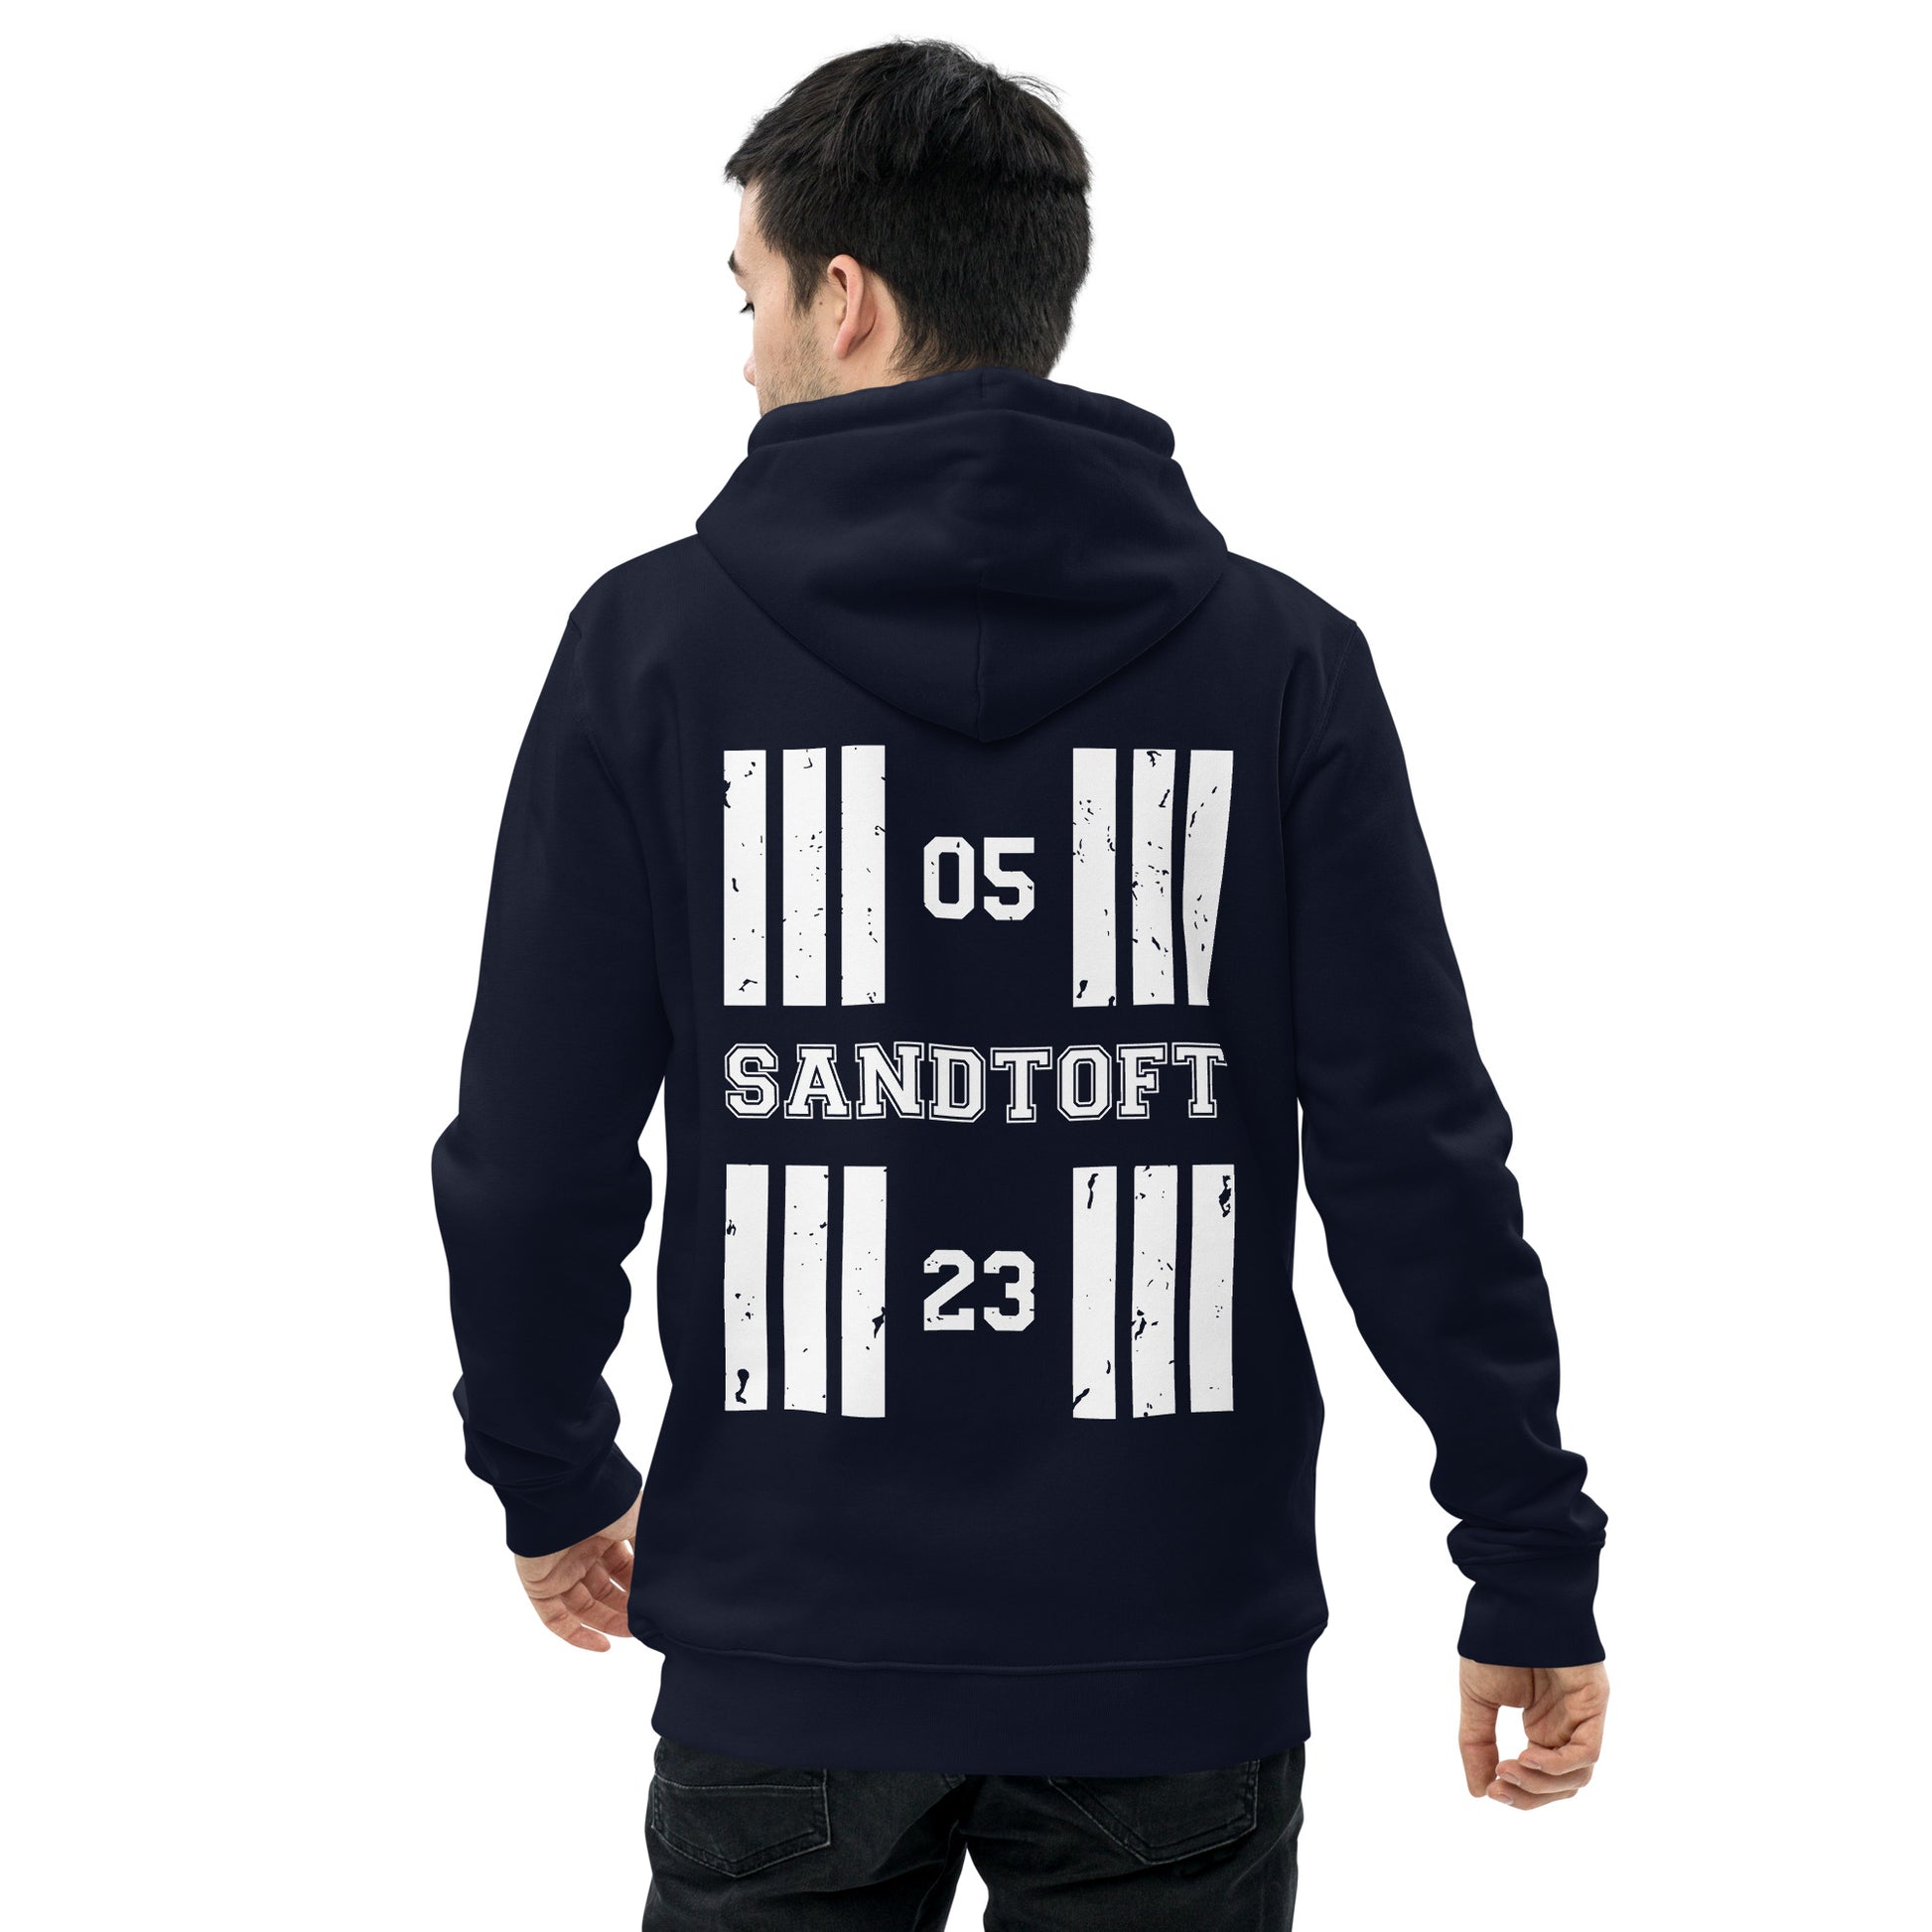 Coloured in navy the Sandtoft Airfield Designator heavyweight hoodie features a discreet collegiate print on the front with a bold print featuring the airport's name and designator, framed by stylised distressed threshold markings on the back.